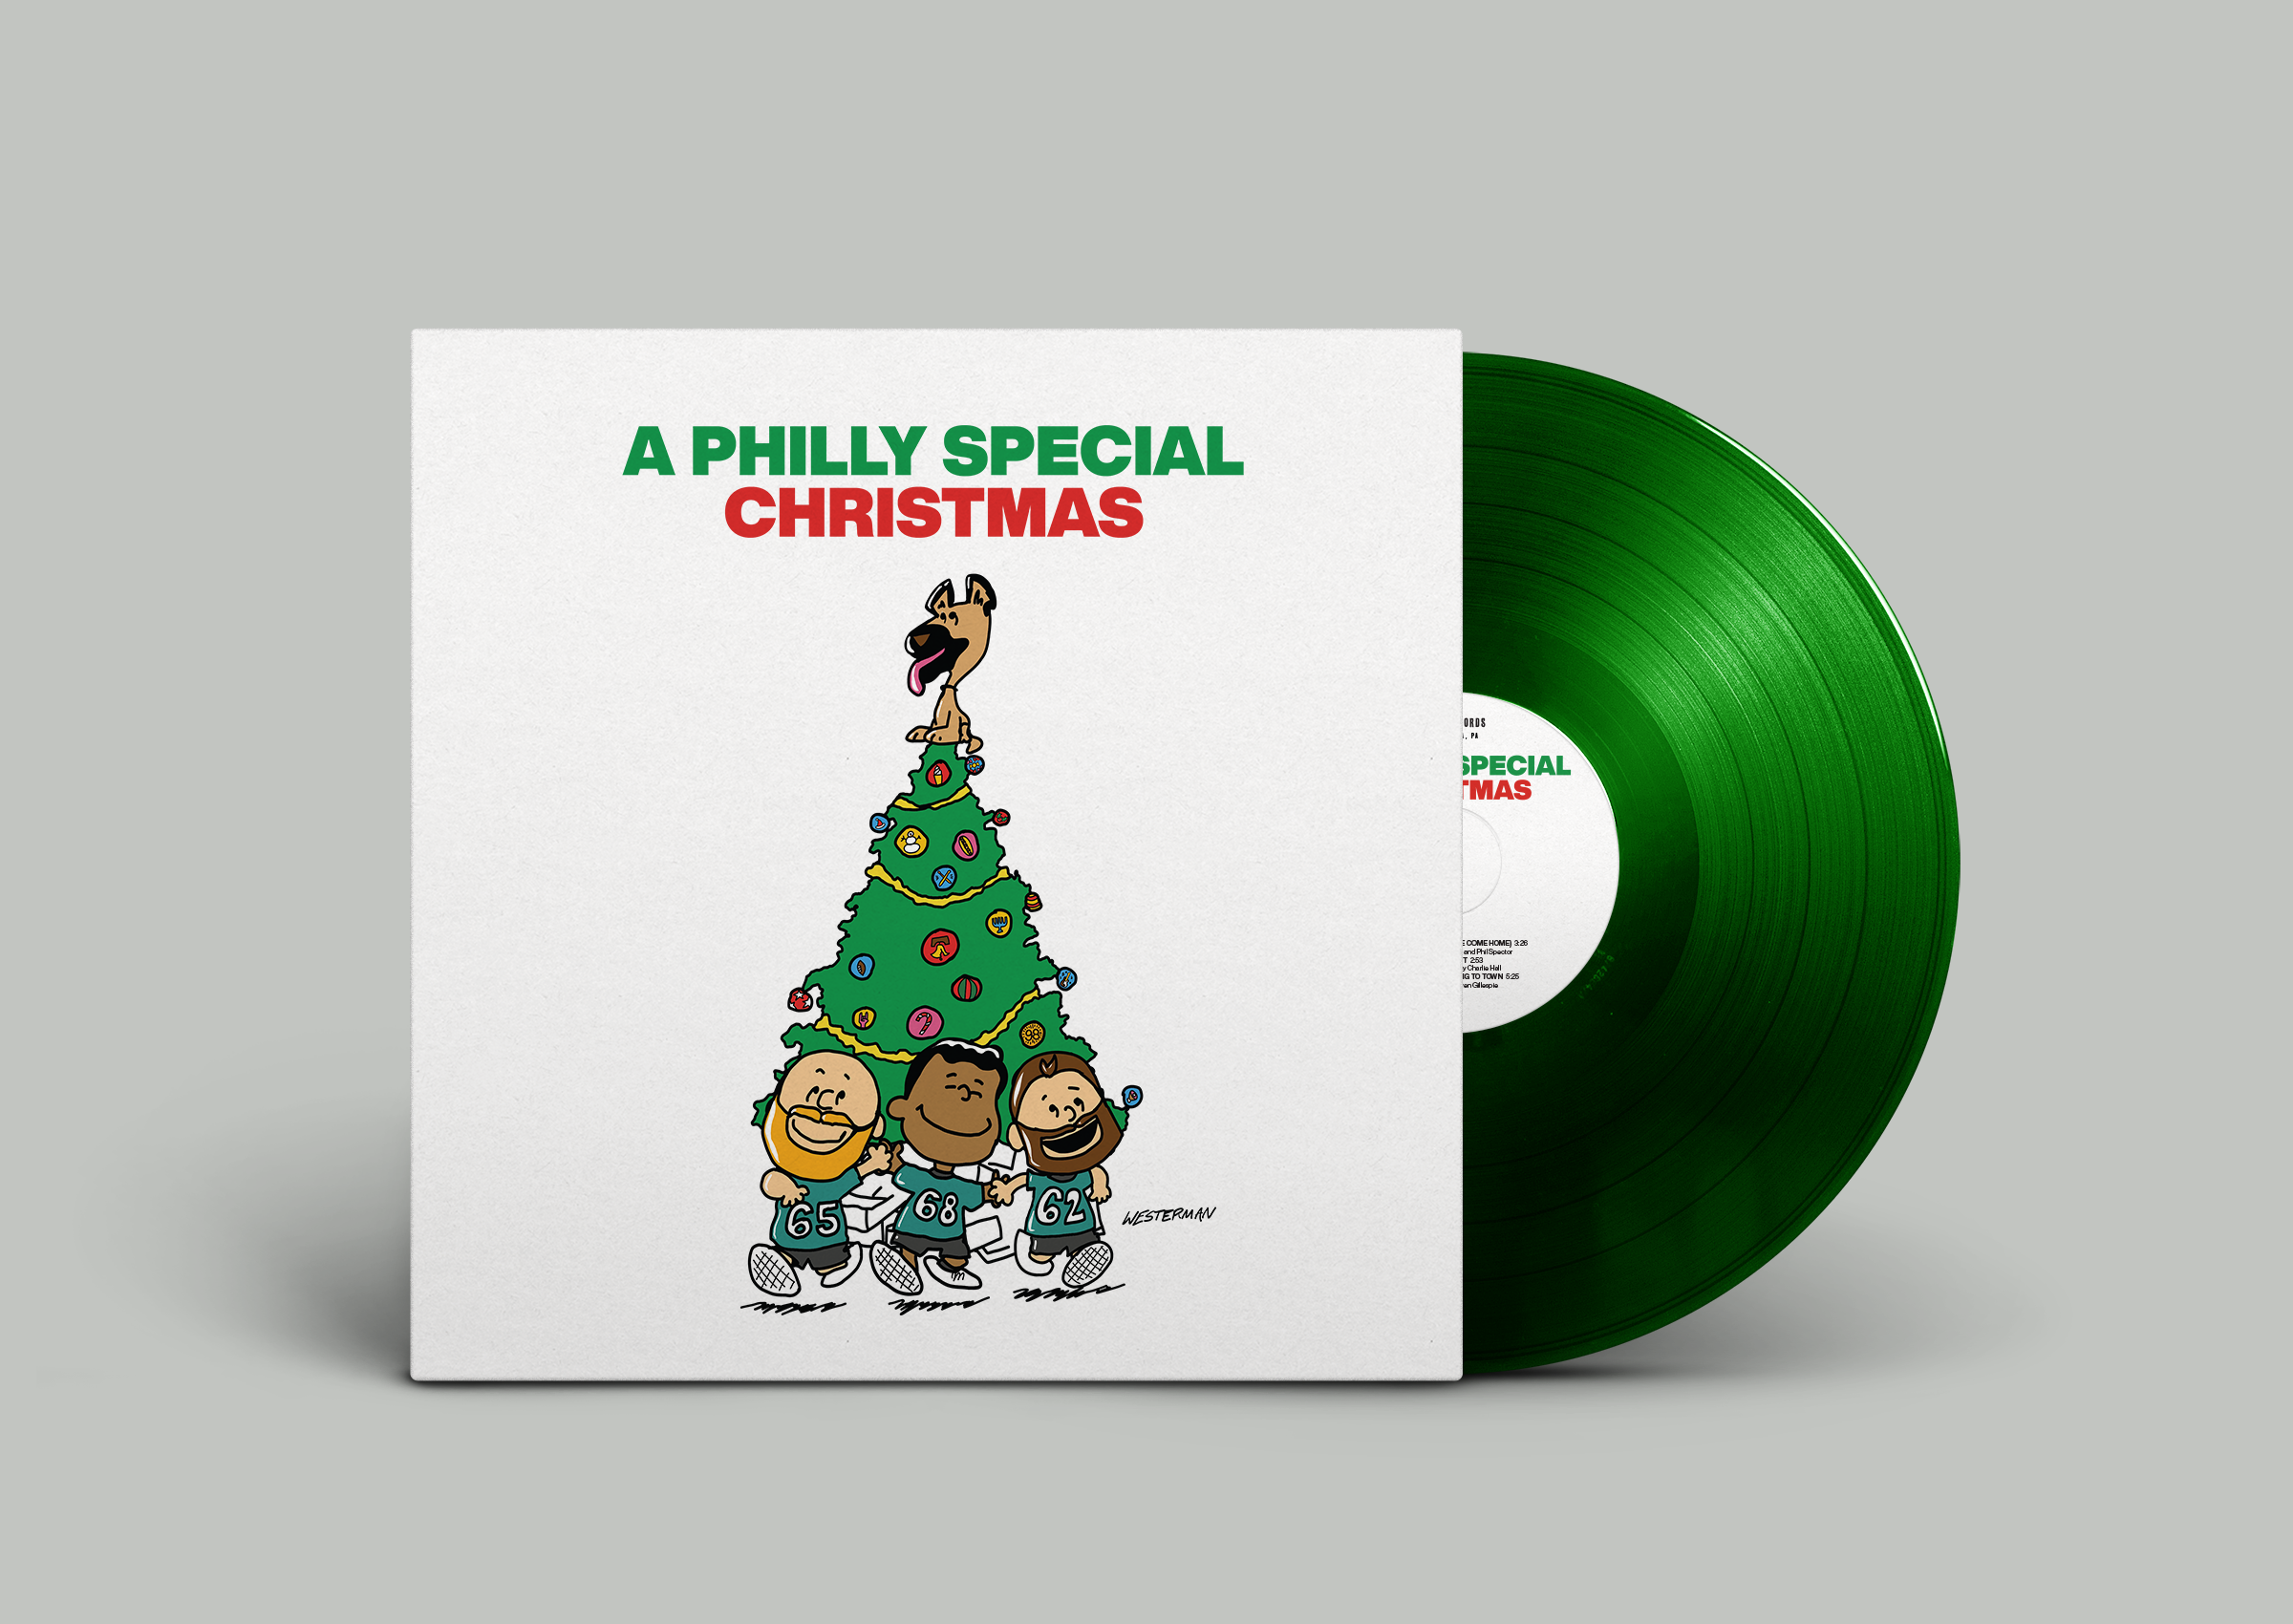 A Philly Special Christmas | "The Record" | Vinyl